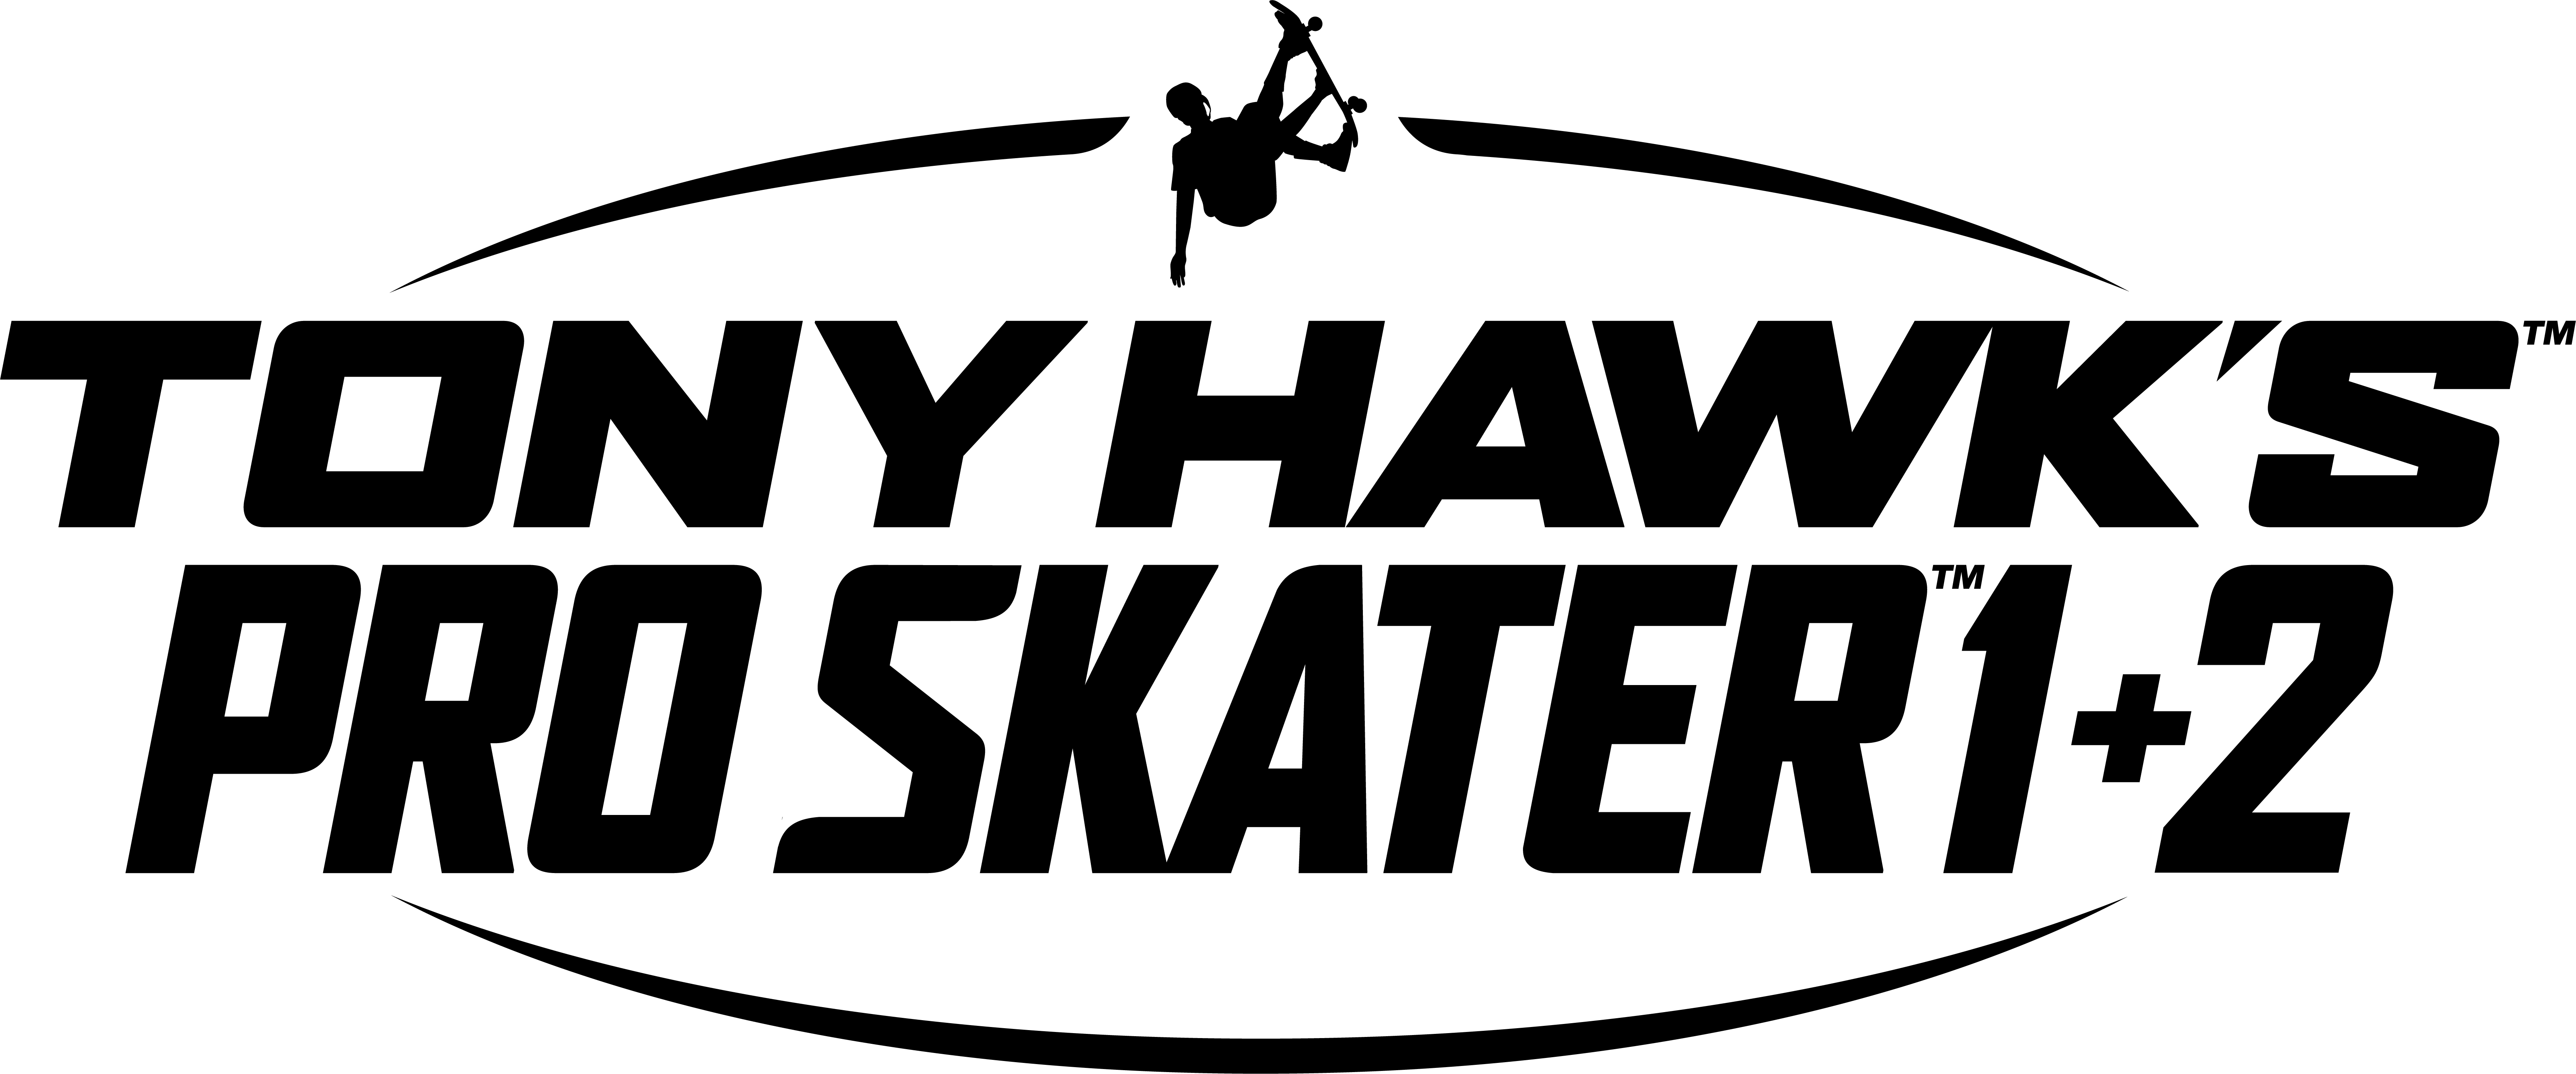 tony hawk pro skater collector's edition ps4